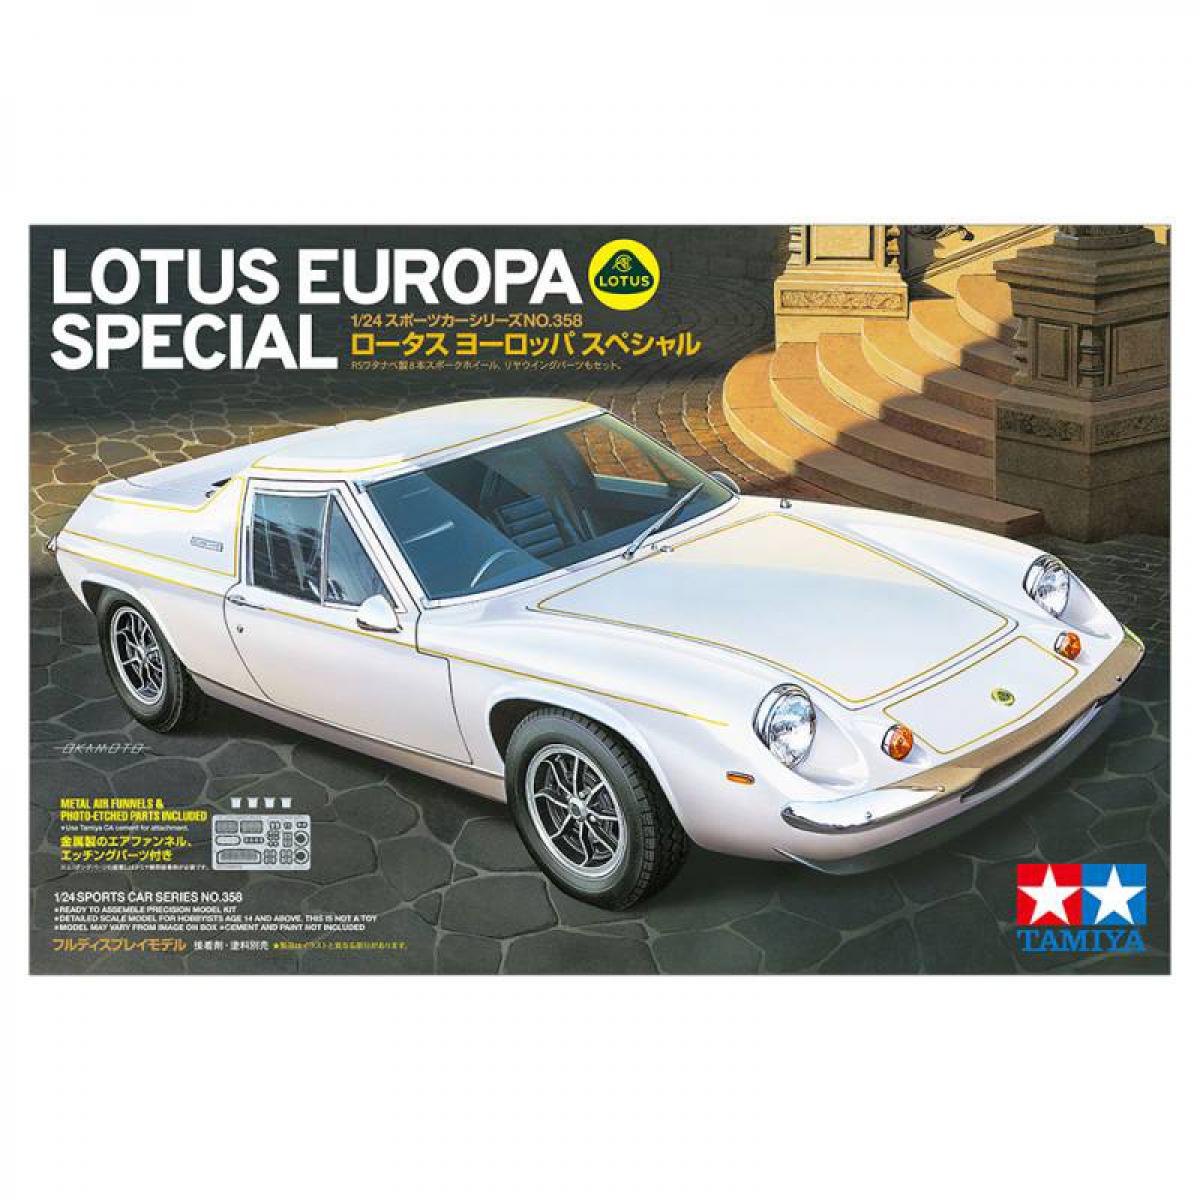 Tamiya - Maquette Voiture Maquette Camion Lotus Europa Special - Voitures